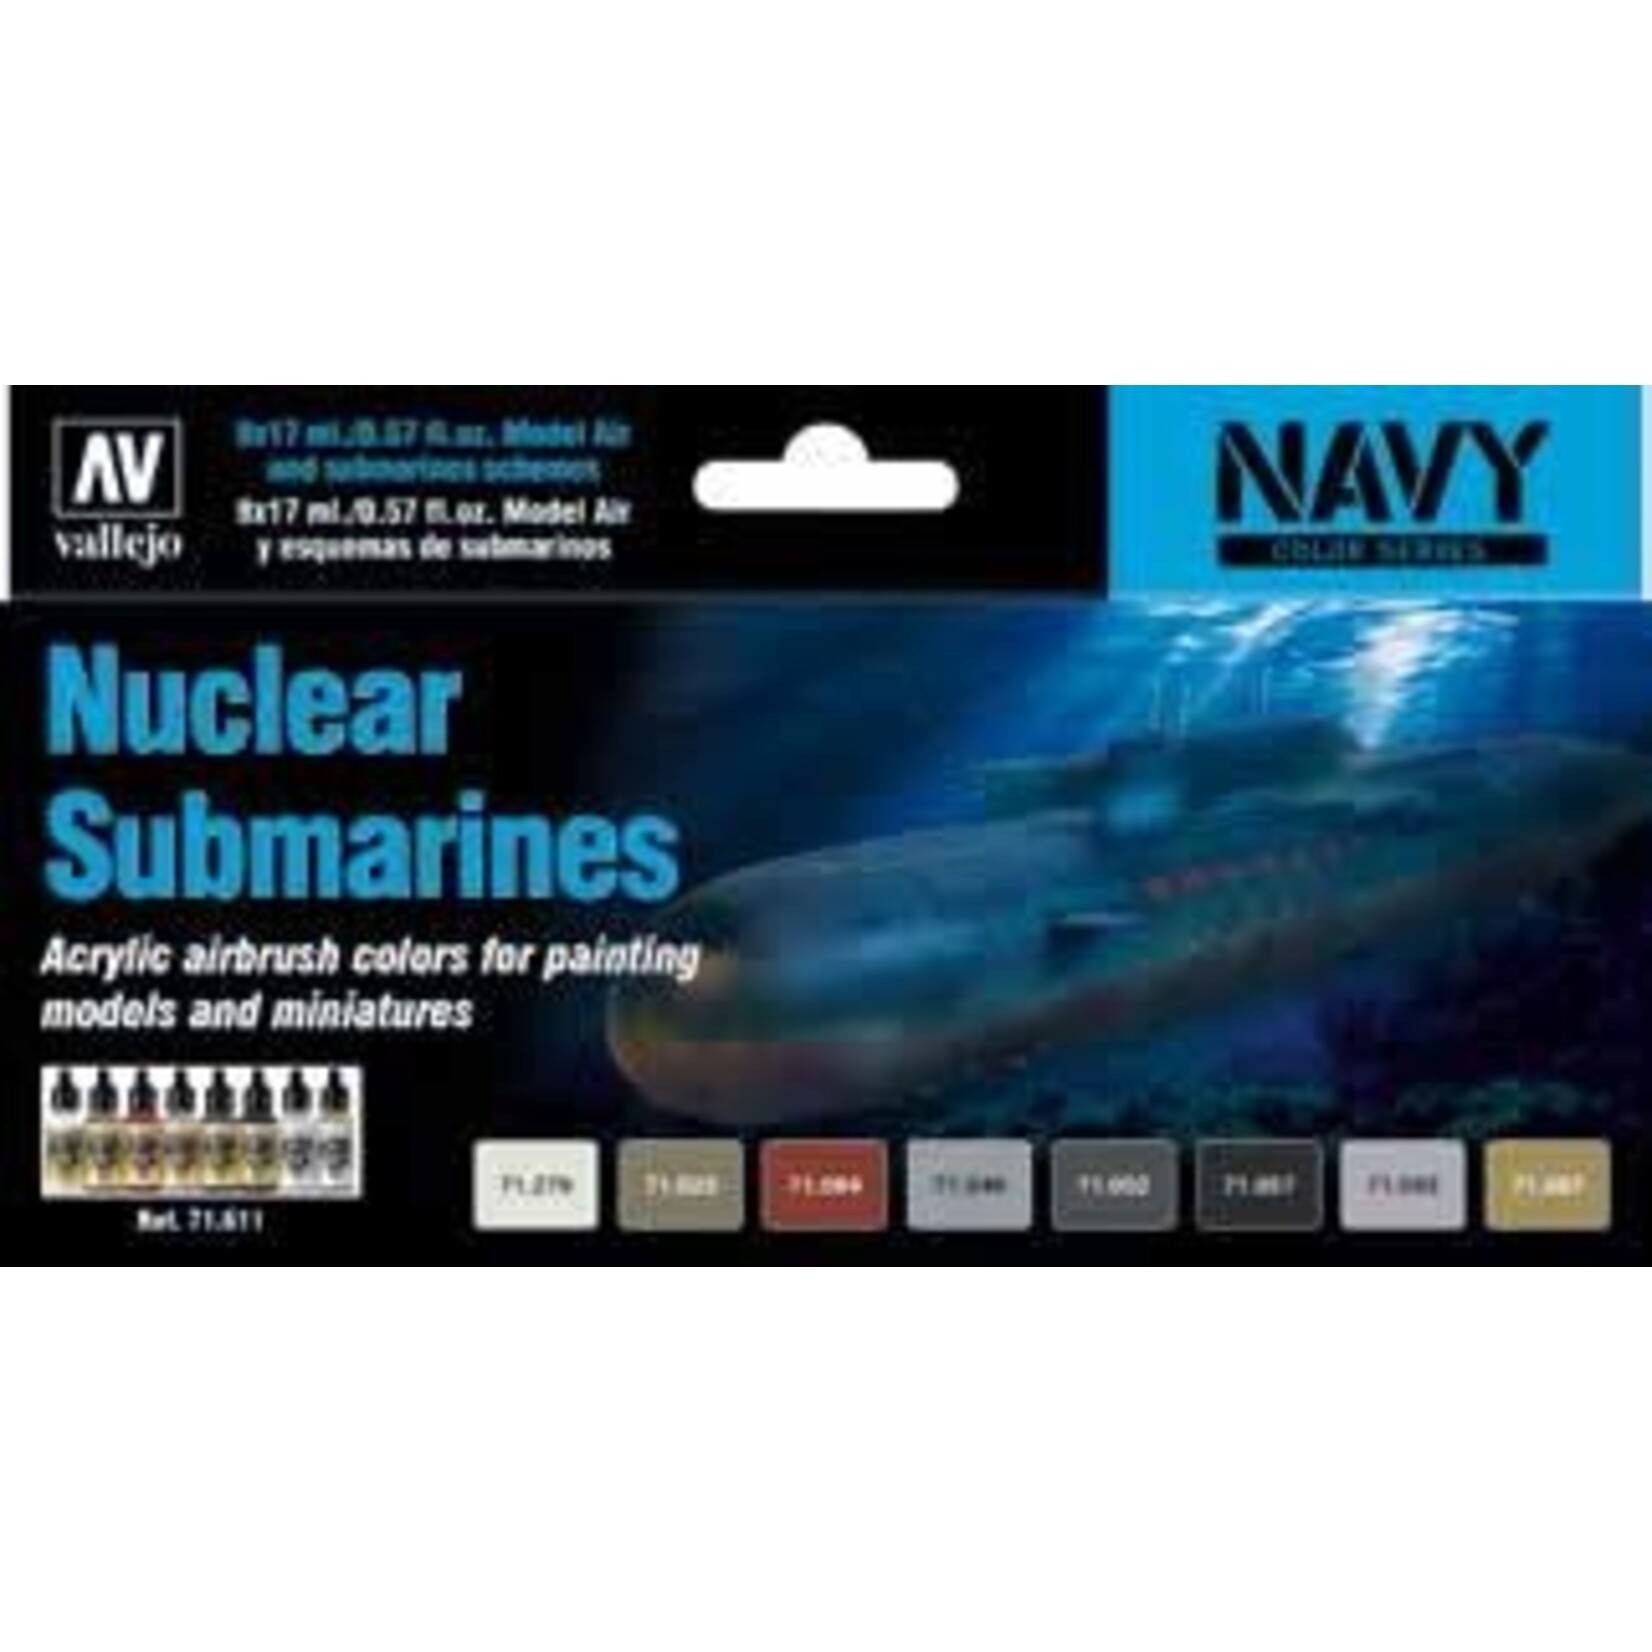 Vallejo 71611 Navy Nuclear Submarines Model Air Paint Set - 8 Colors/17ml Bottles